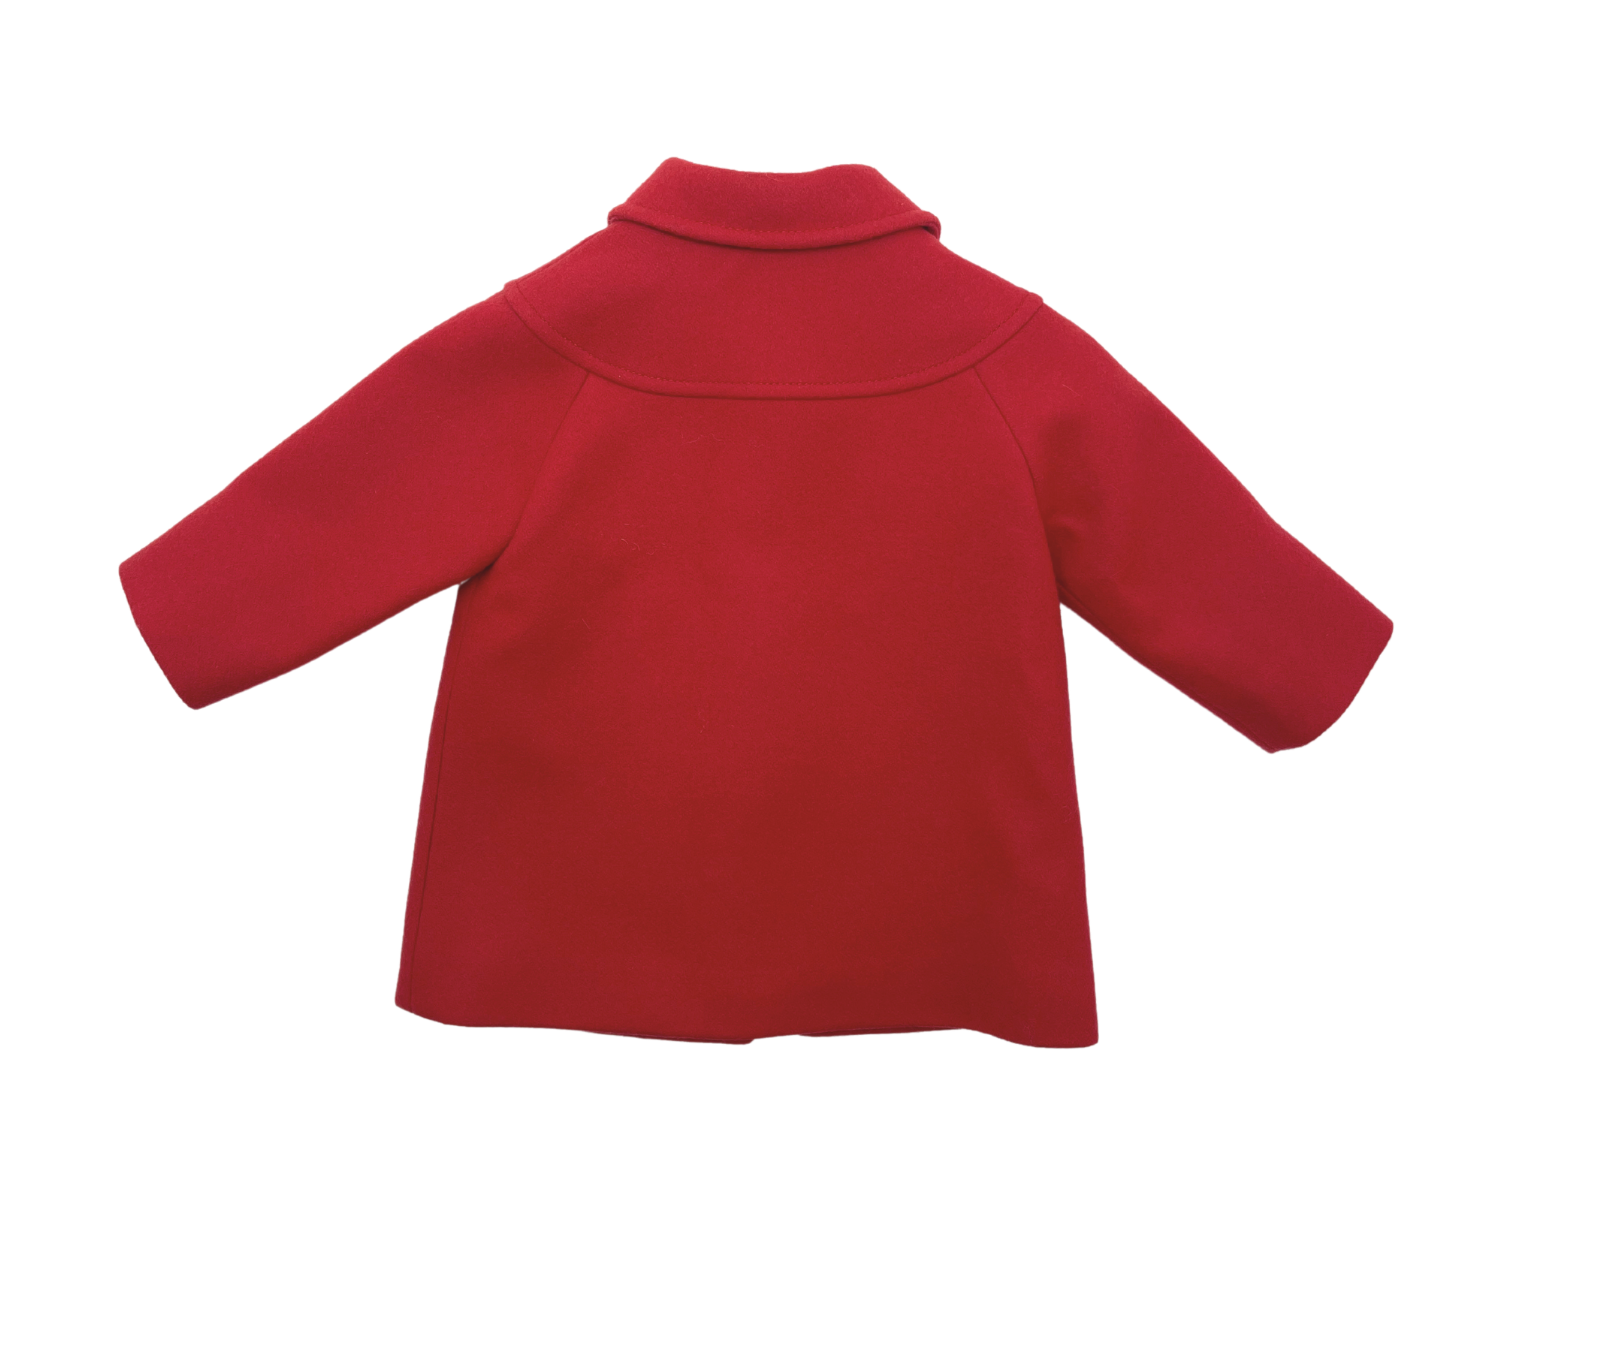 GUCCI - "Grapes" red wool coat - 6/9 months